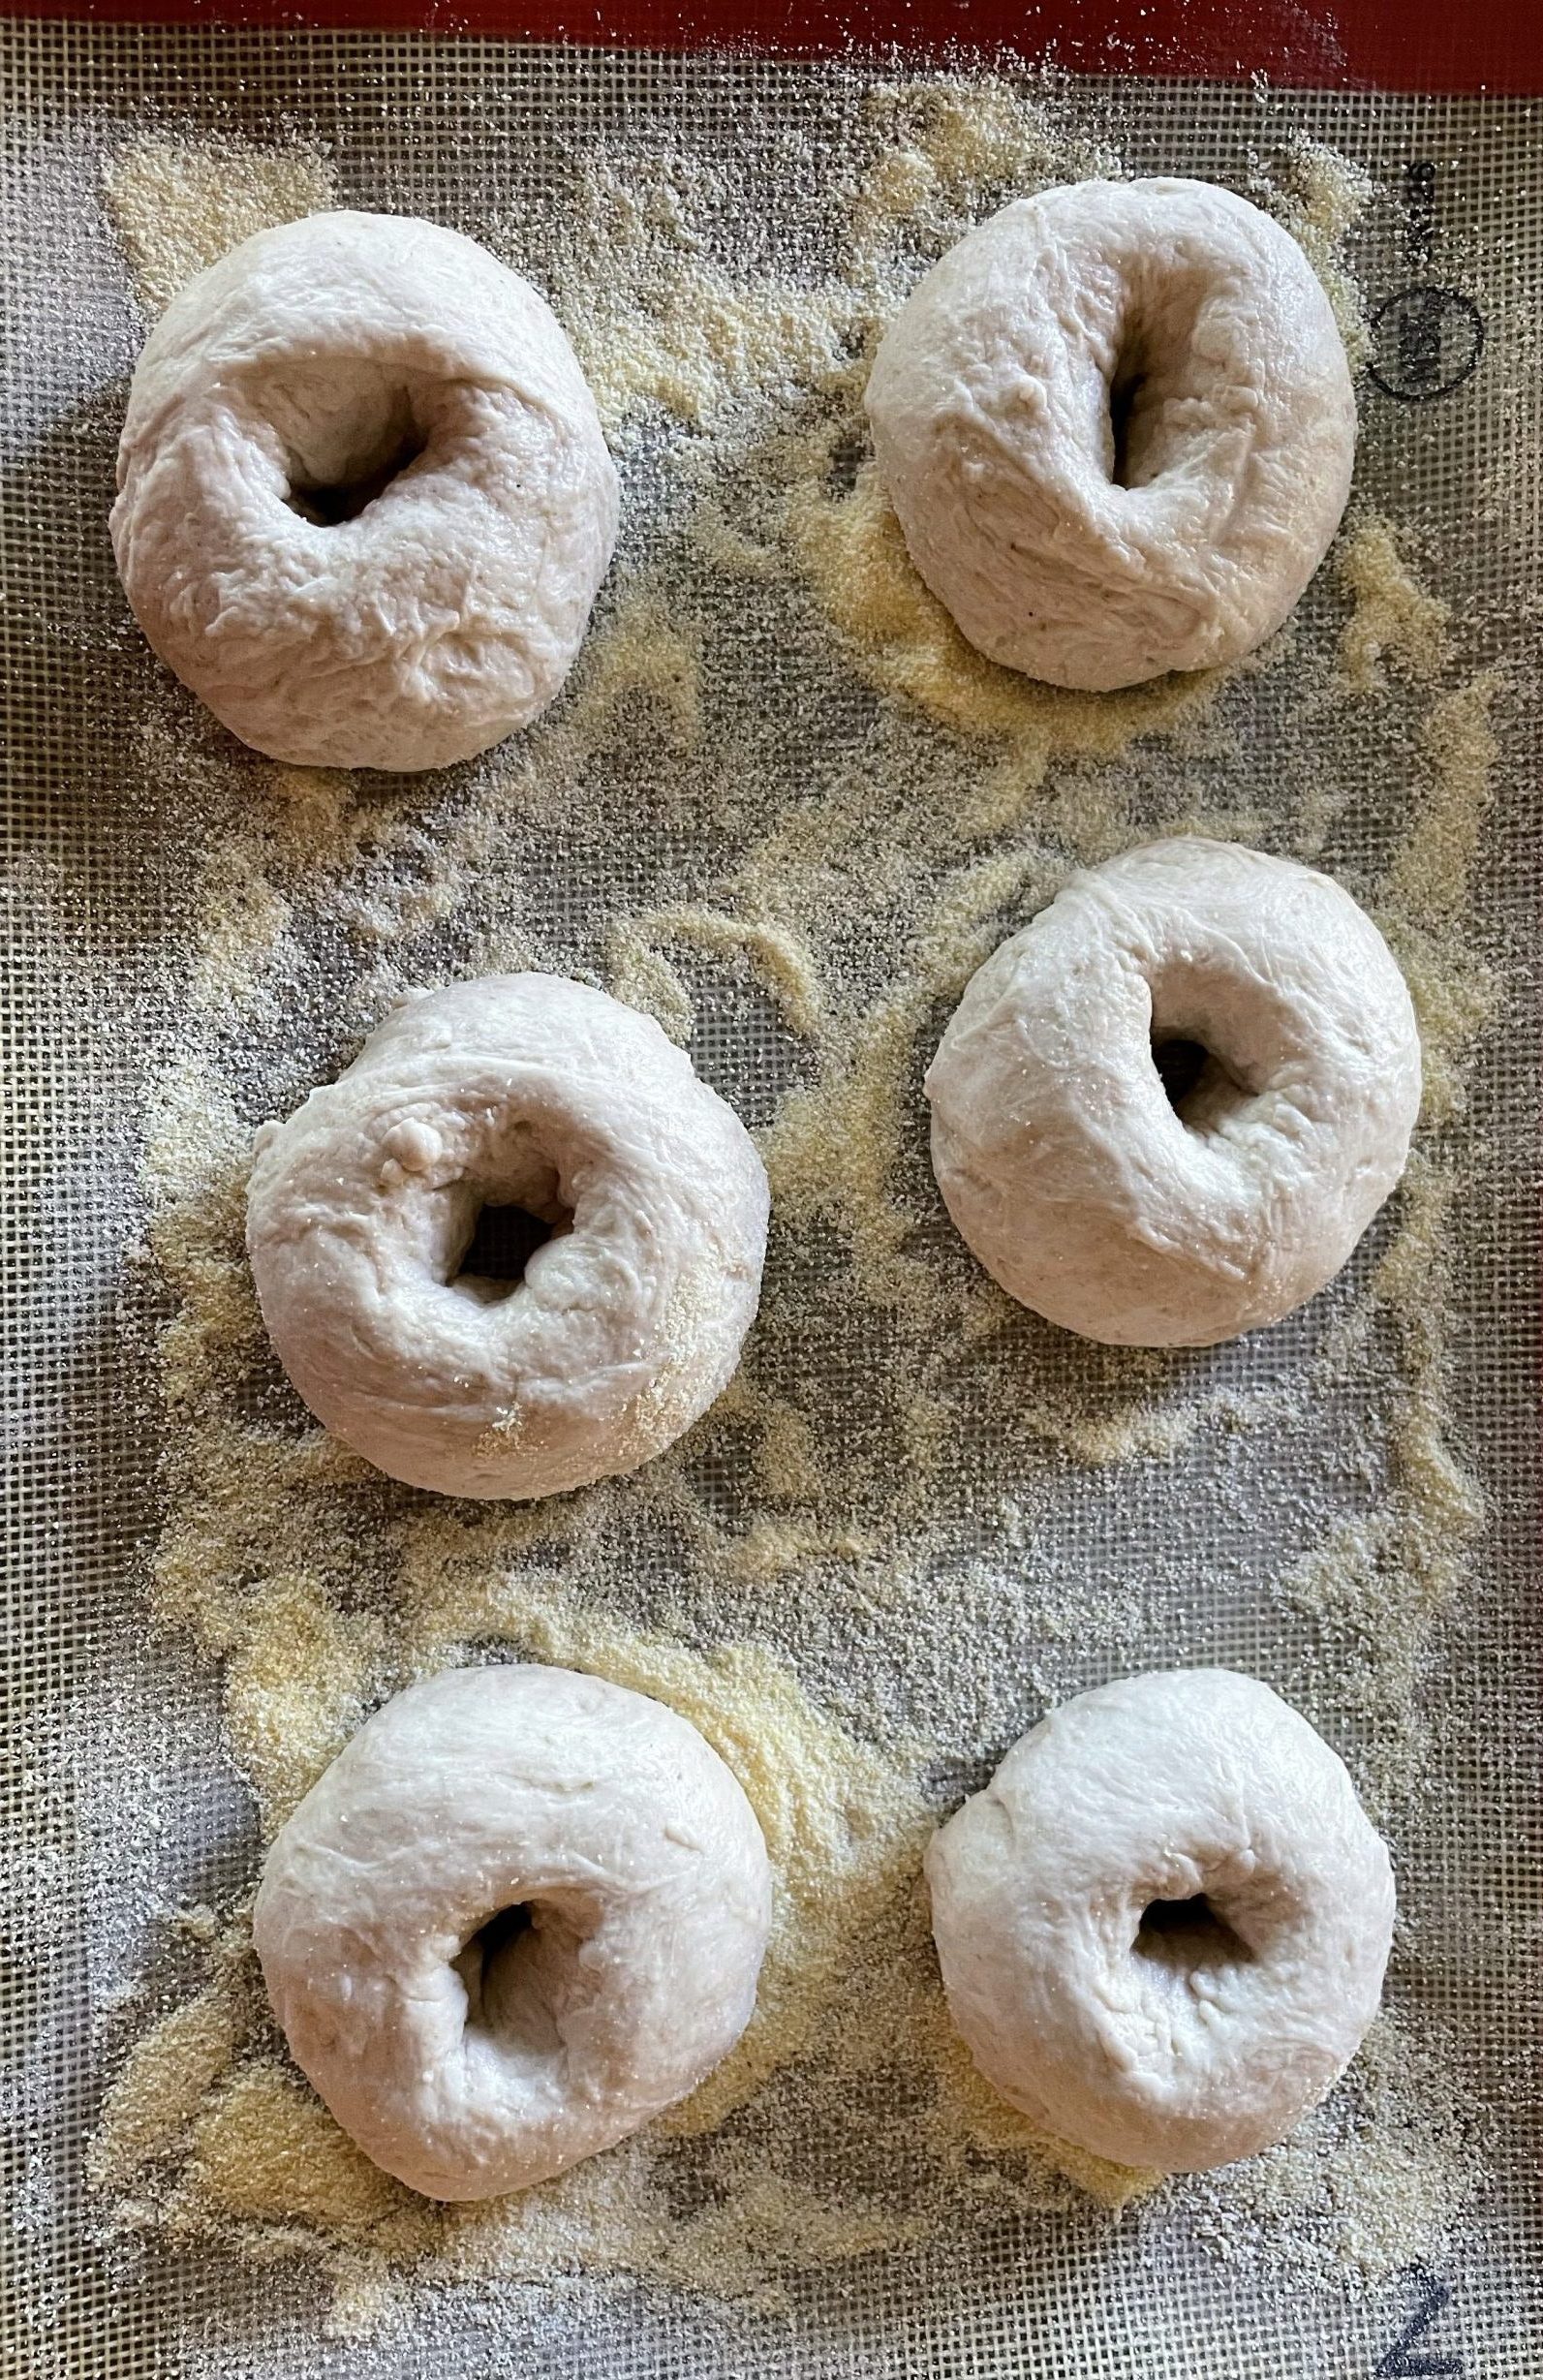 Bagels before proofing in refrigerator.